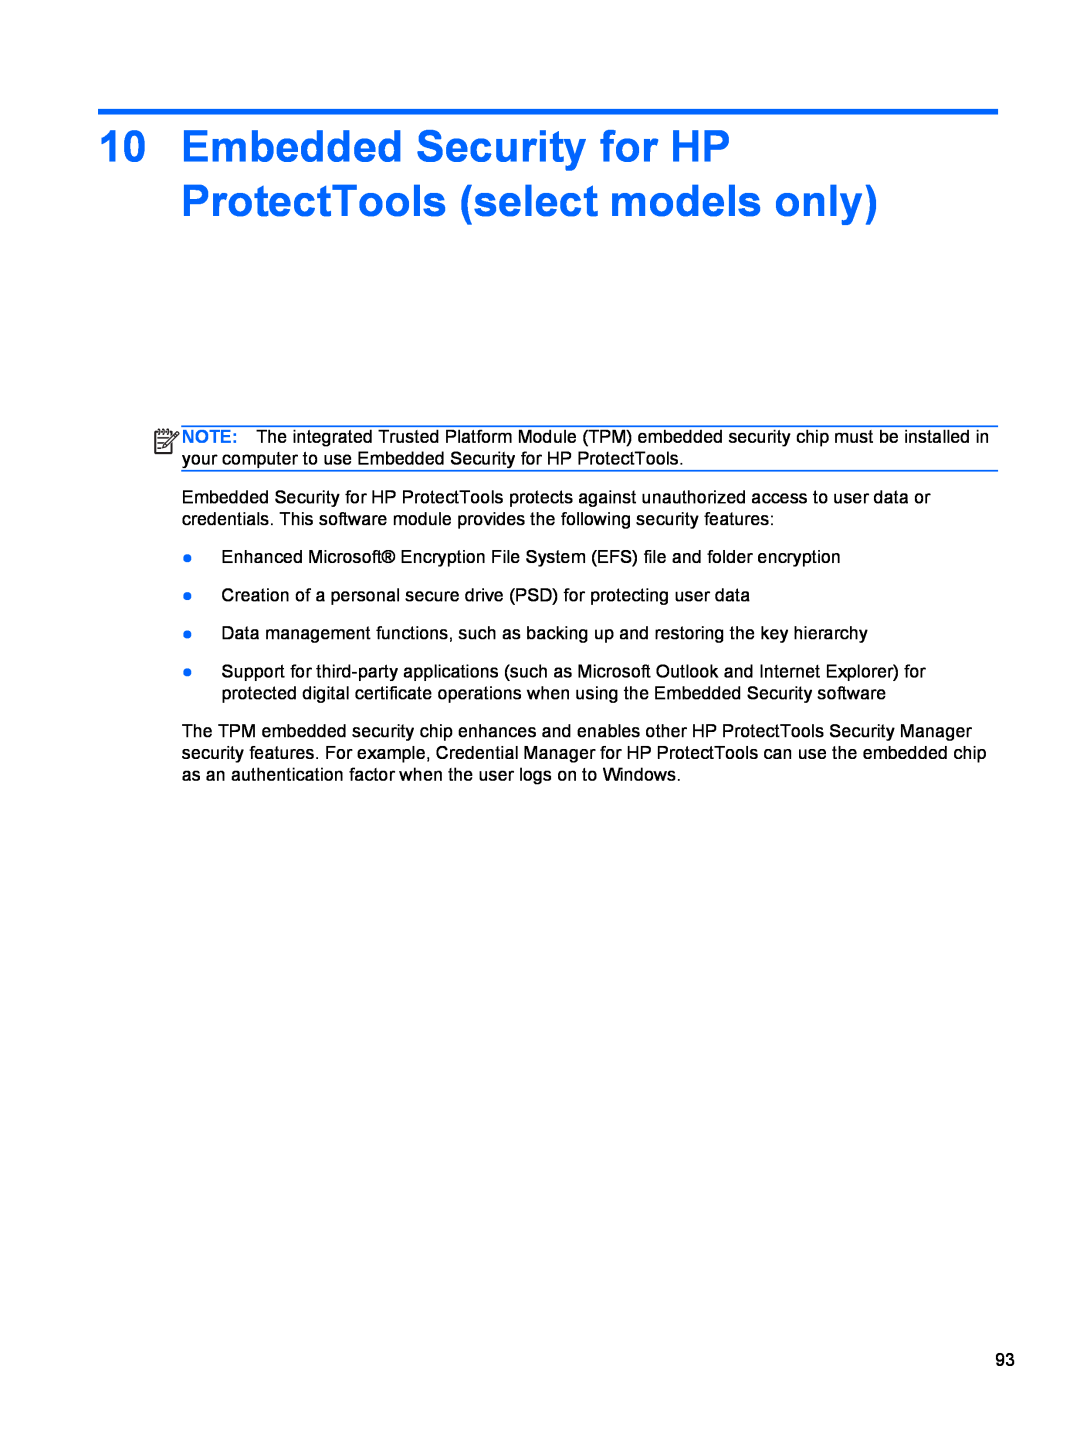 HP 2 Base Model manual Embedded Security for HP ProtectTools select models only 